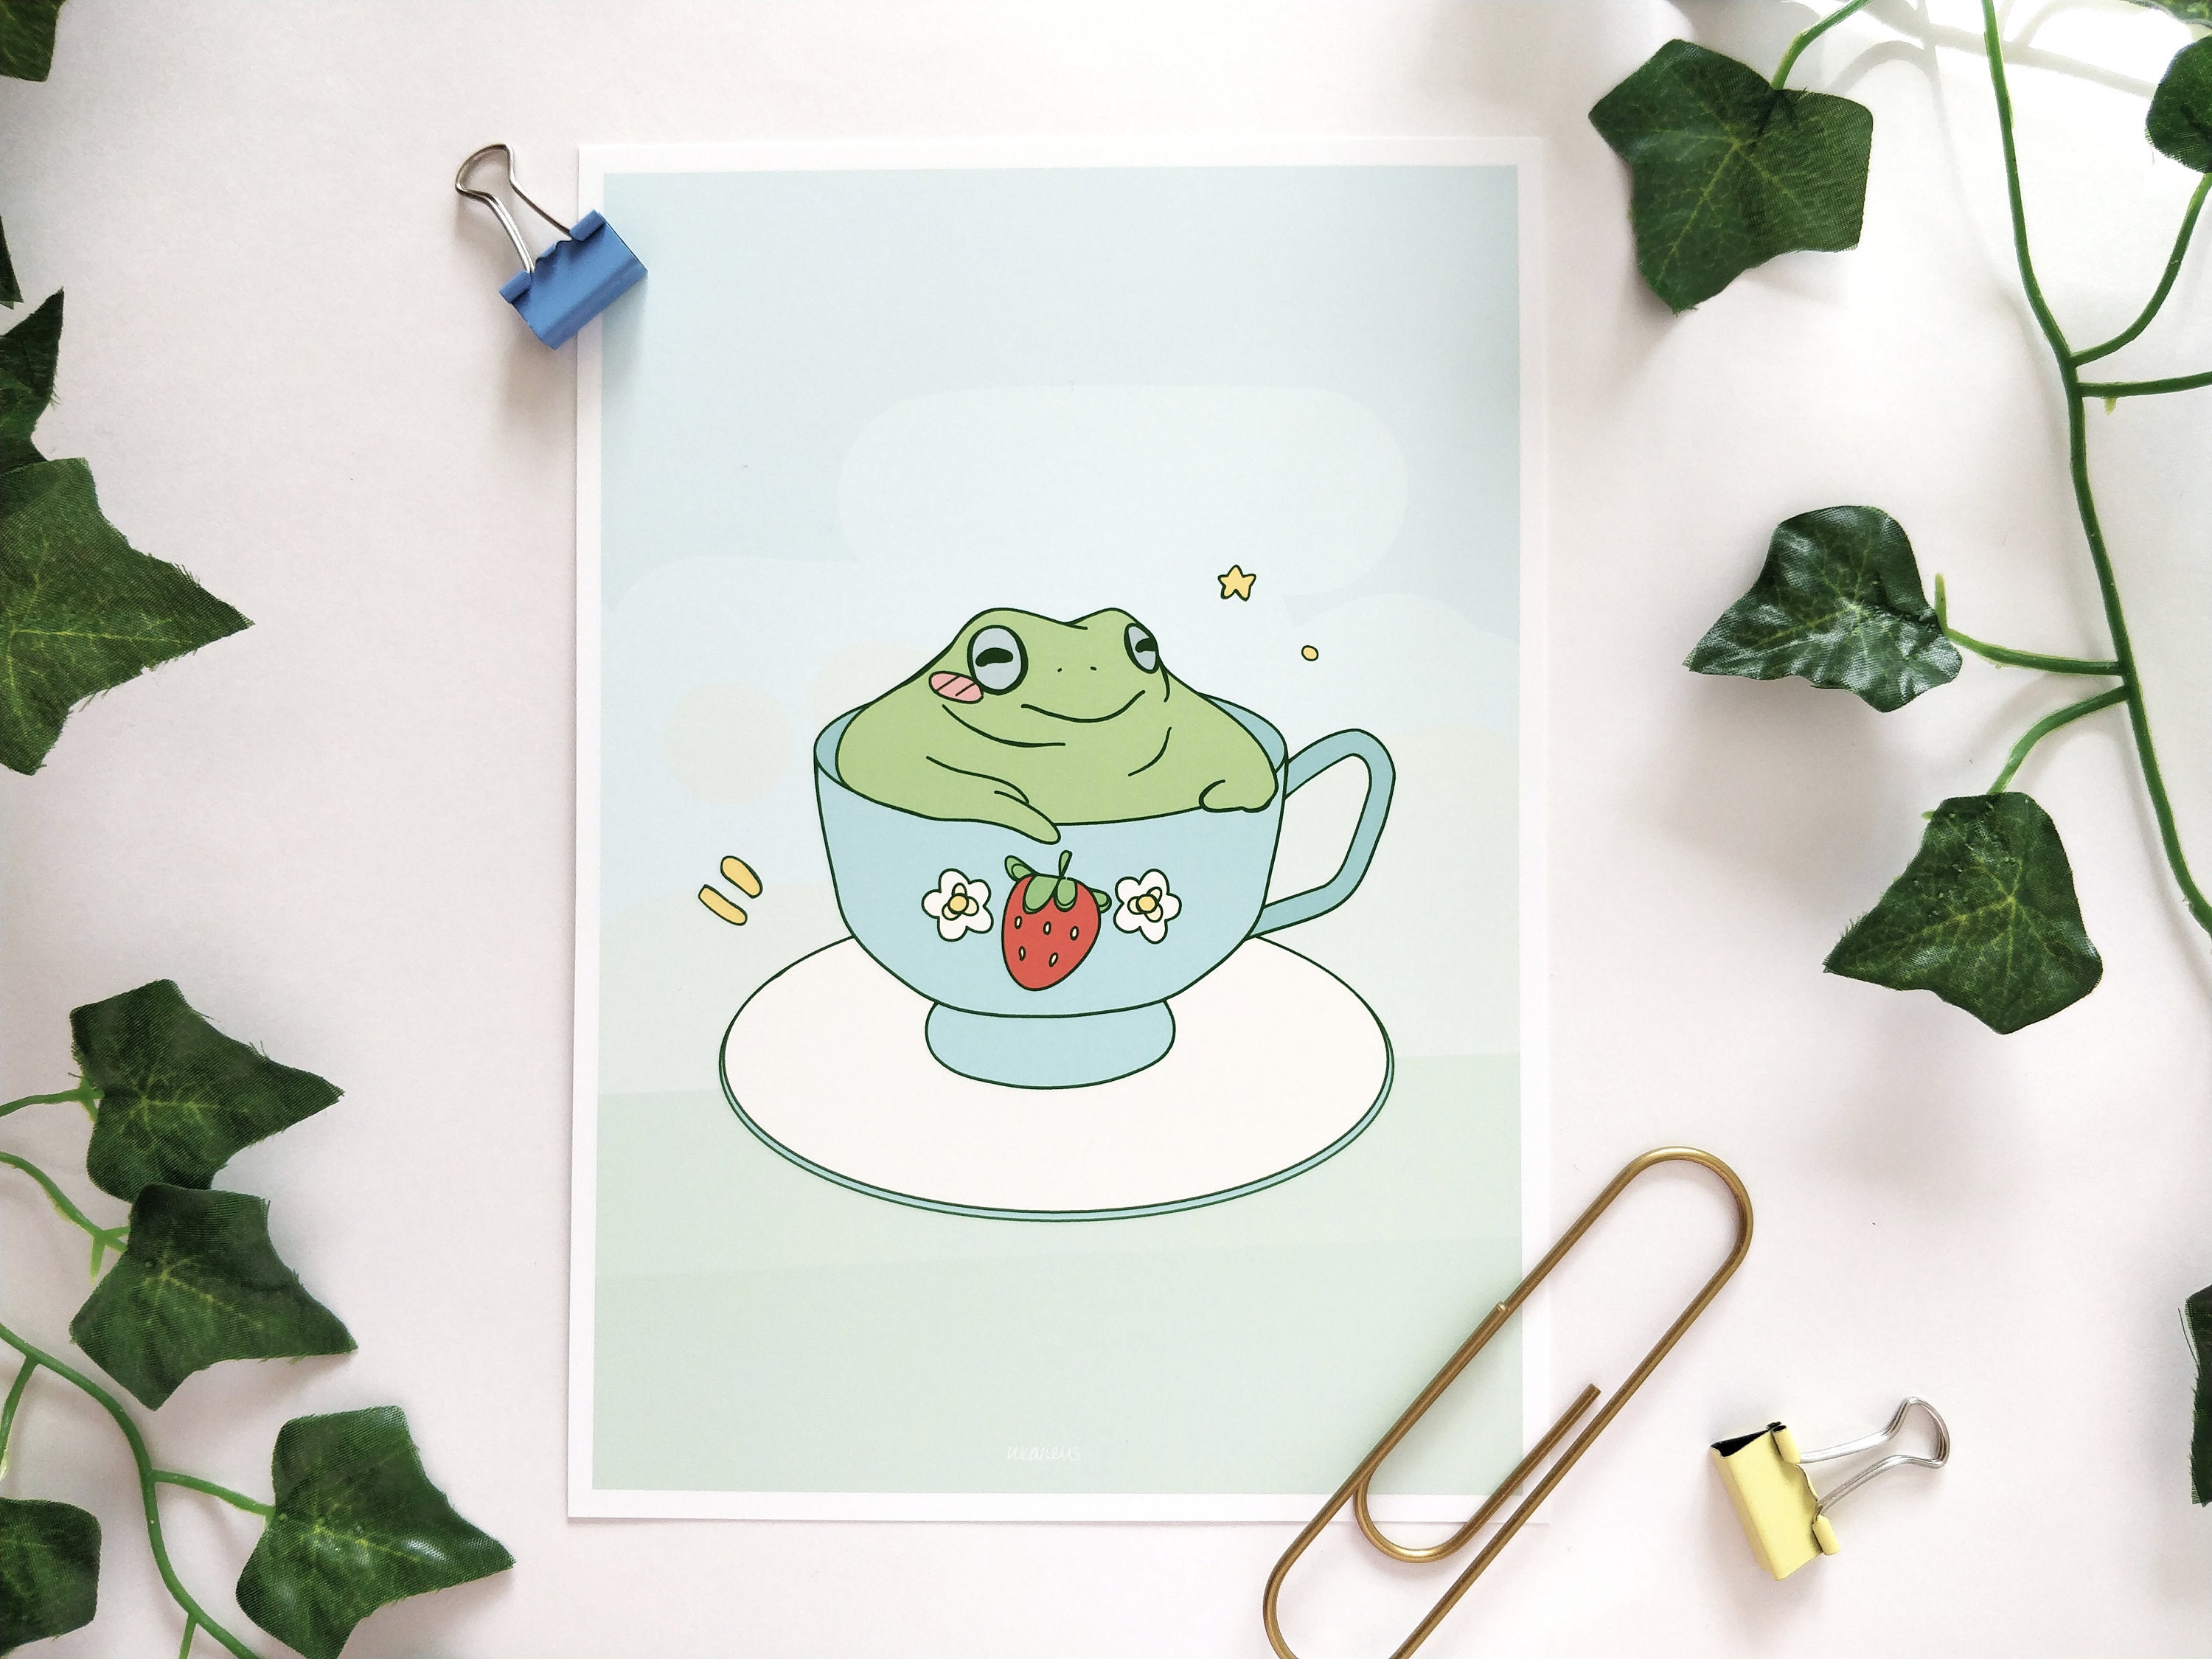 Cute Cottagecore Floral Frog Aesthetic, an art acrylic by L VT